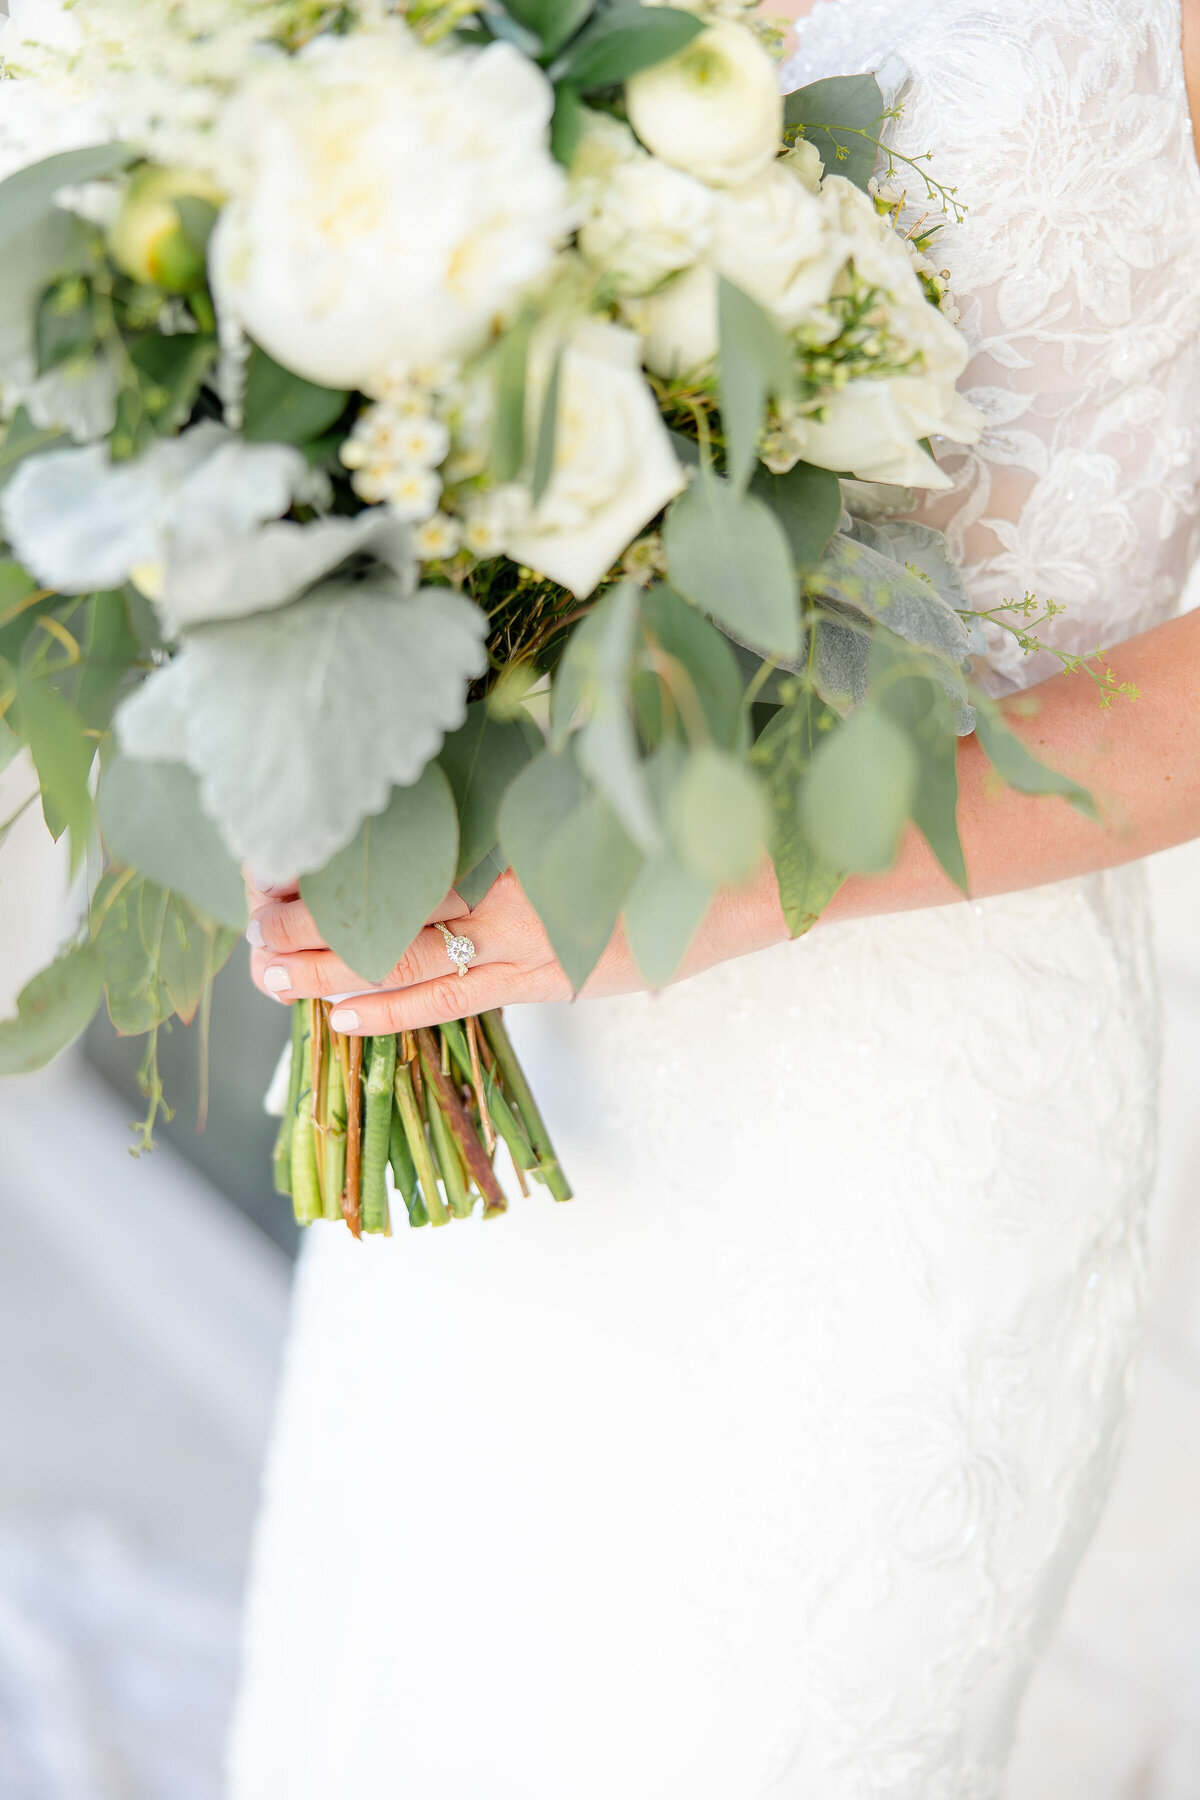 wedding ring in focus while bride holds white rose bouquet captured by wedding photographer in Texas